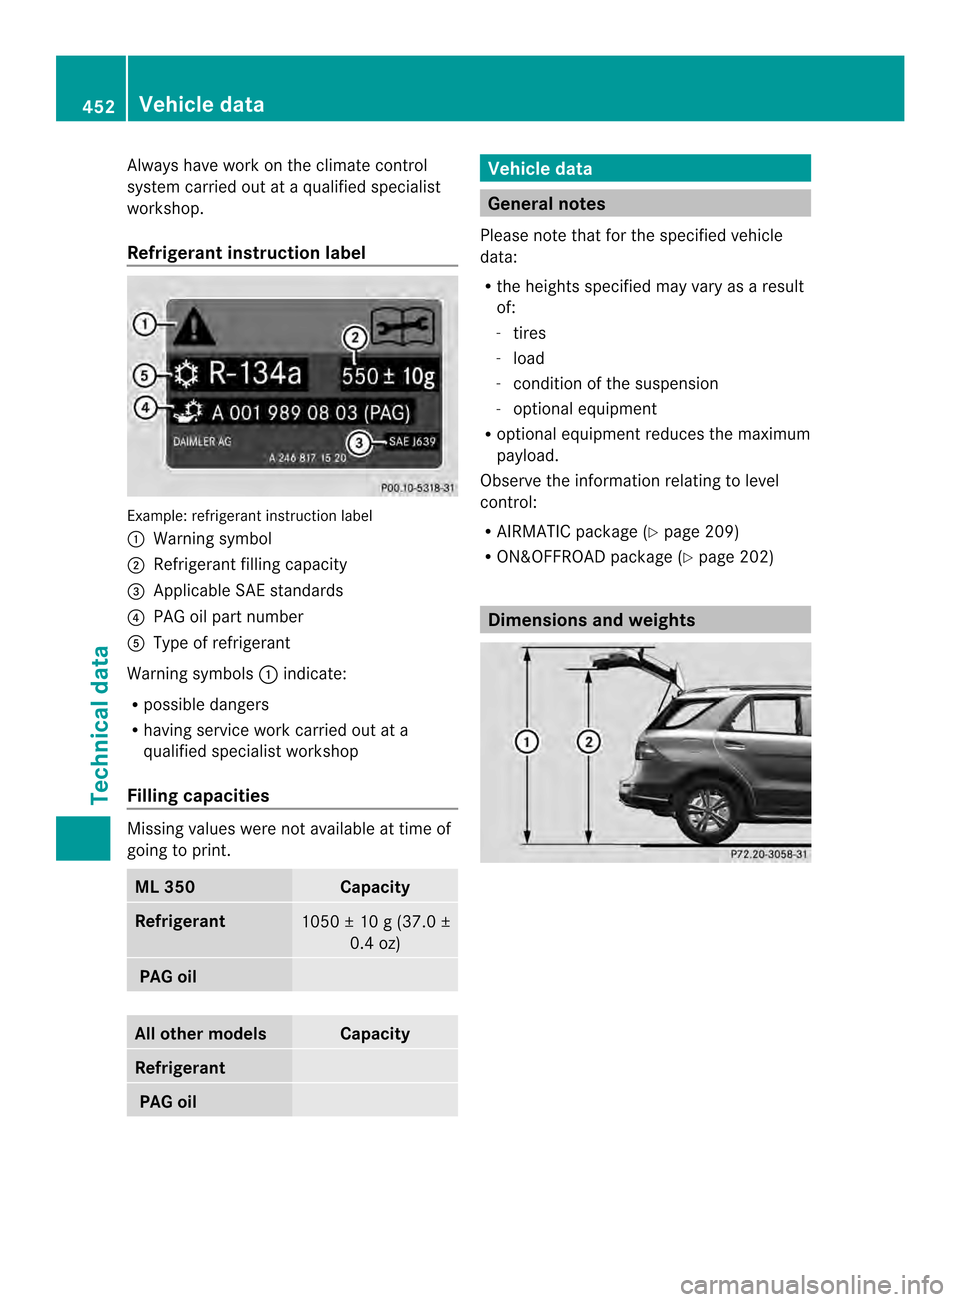 MERCEDES-BENZ M-Class 2014 W166 Owners Manual Always have work on the climate control
system carried ou
tataqualified specialist
workshop.
Refrigerant instruction label Example: refrigerant instruction label
0002
Warning symbol
0003 Refrigeran tf